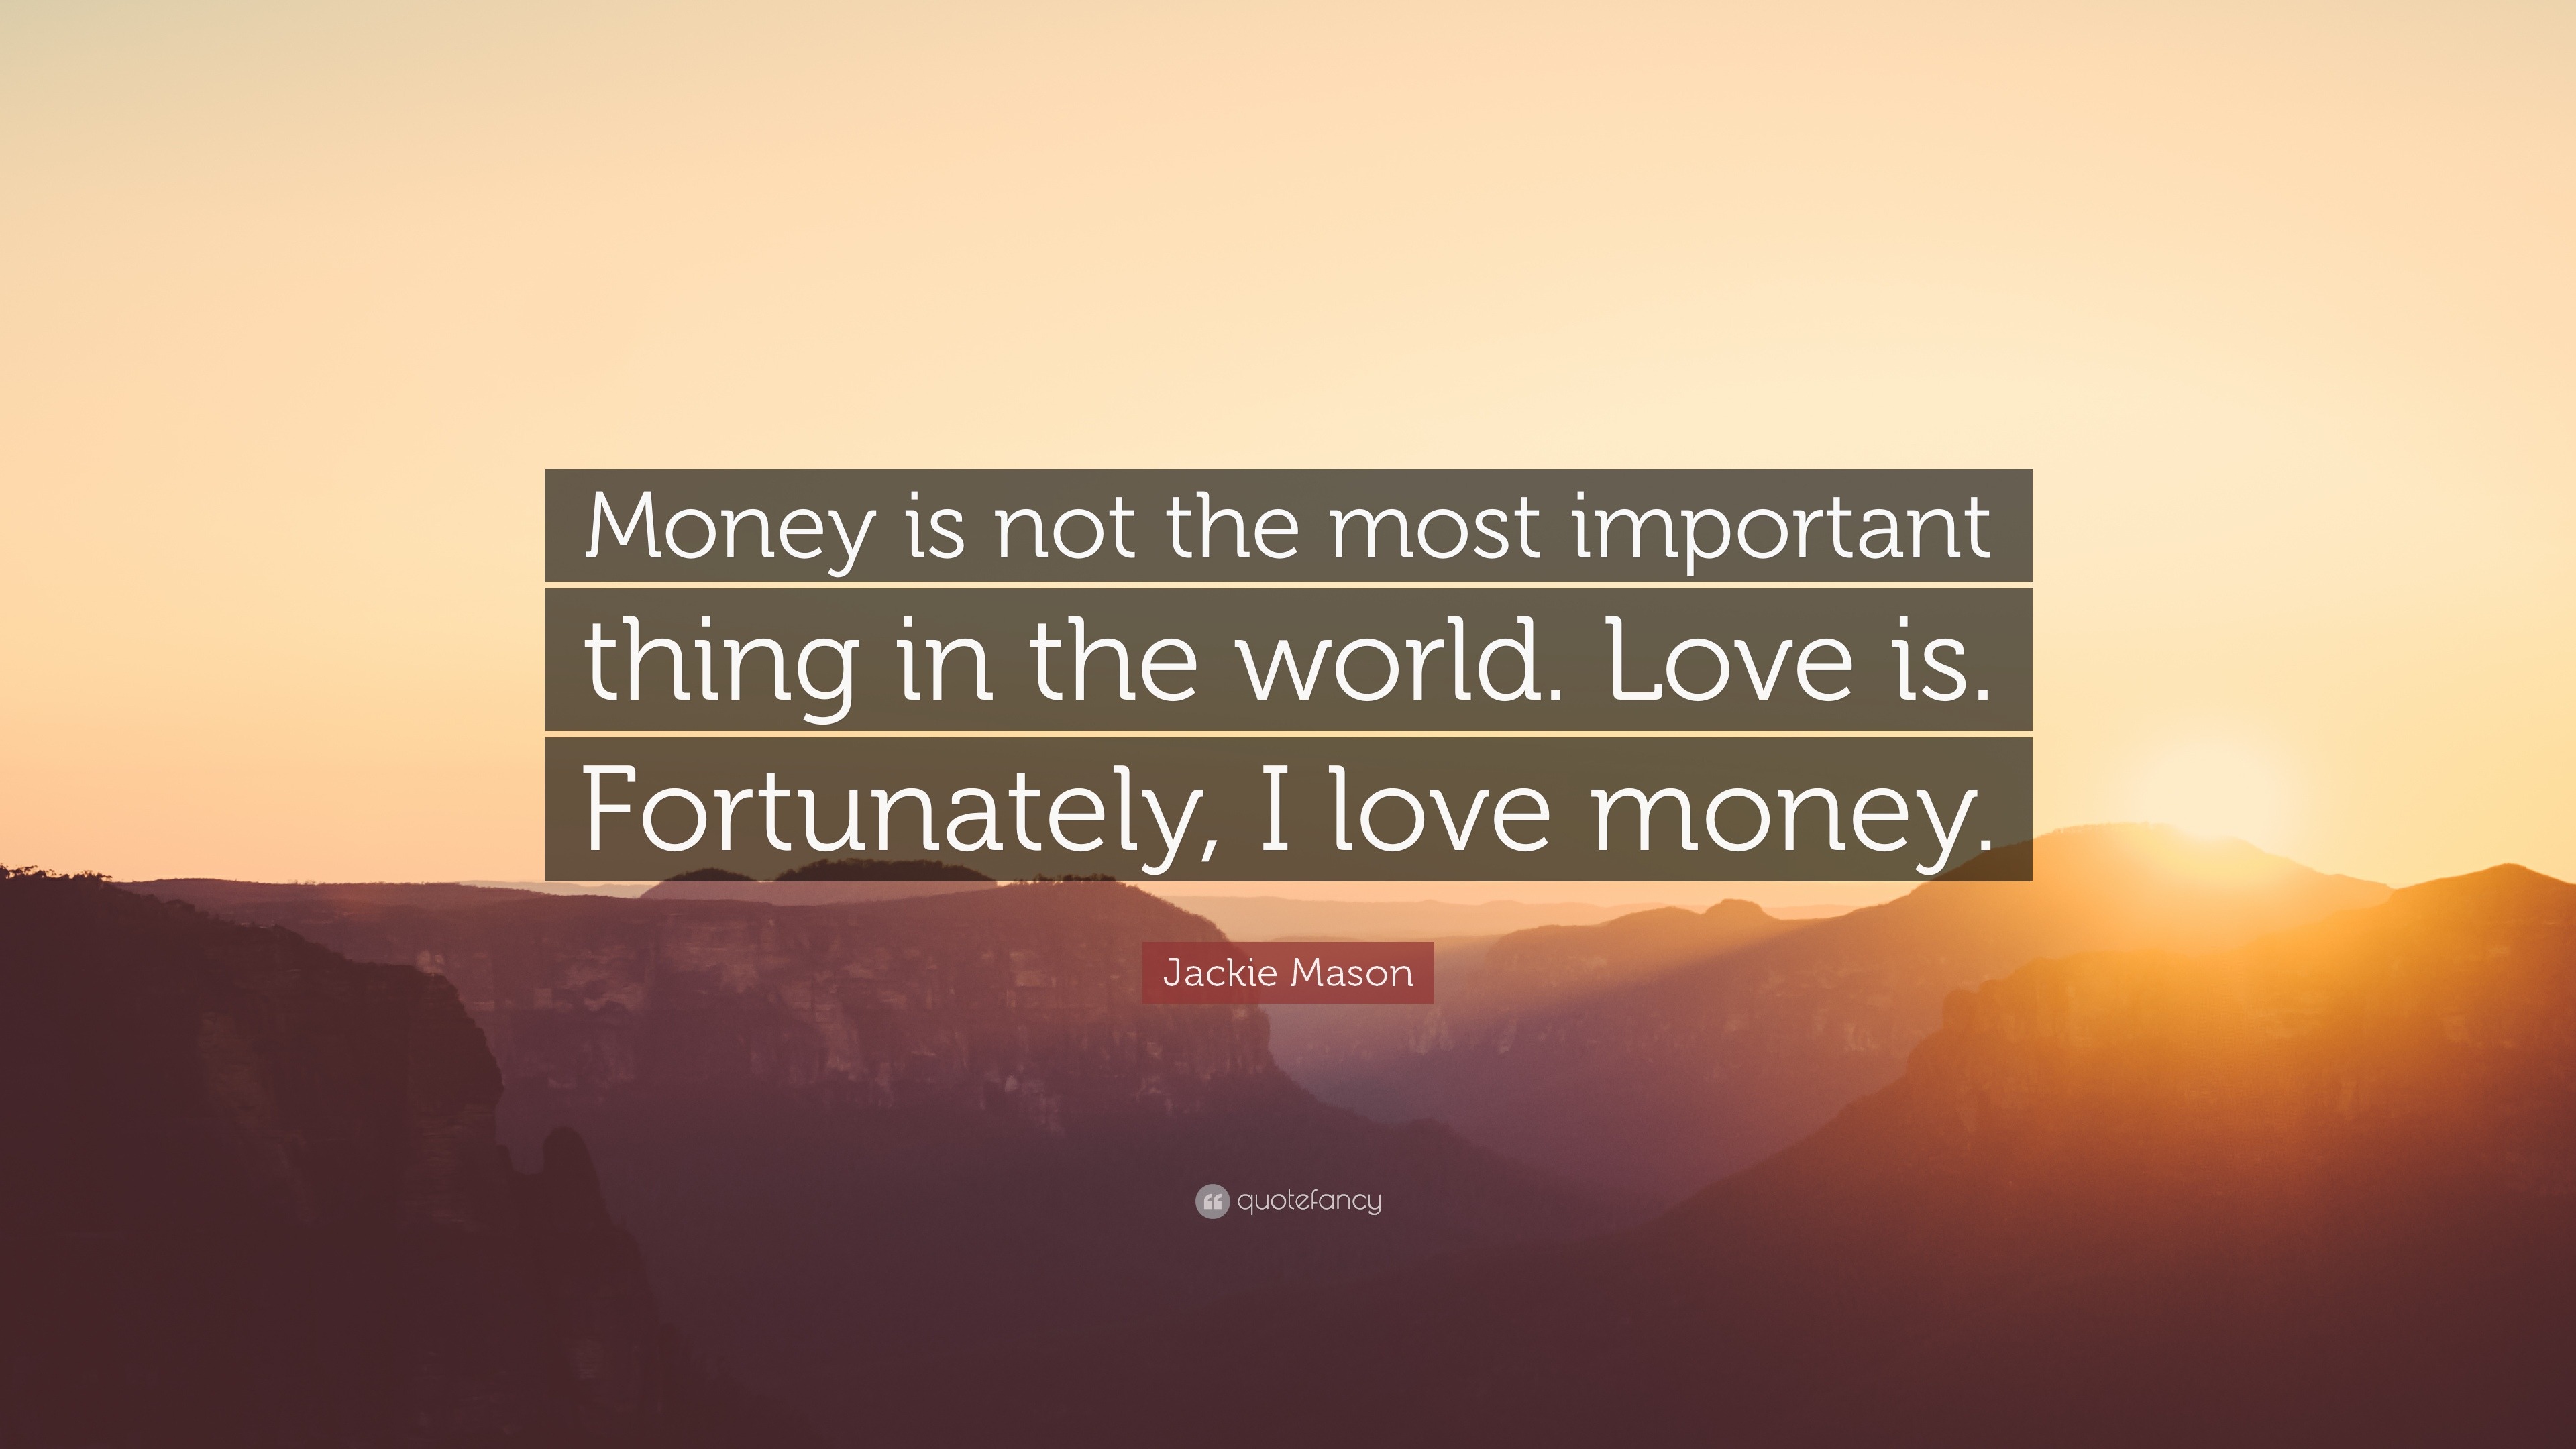 Jackie Mason Quote "Money is not the most important thing in the world...